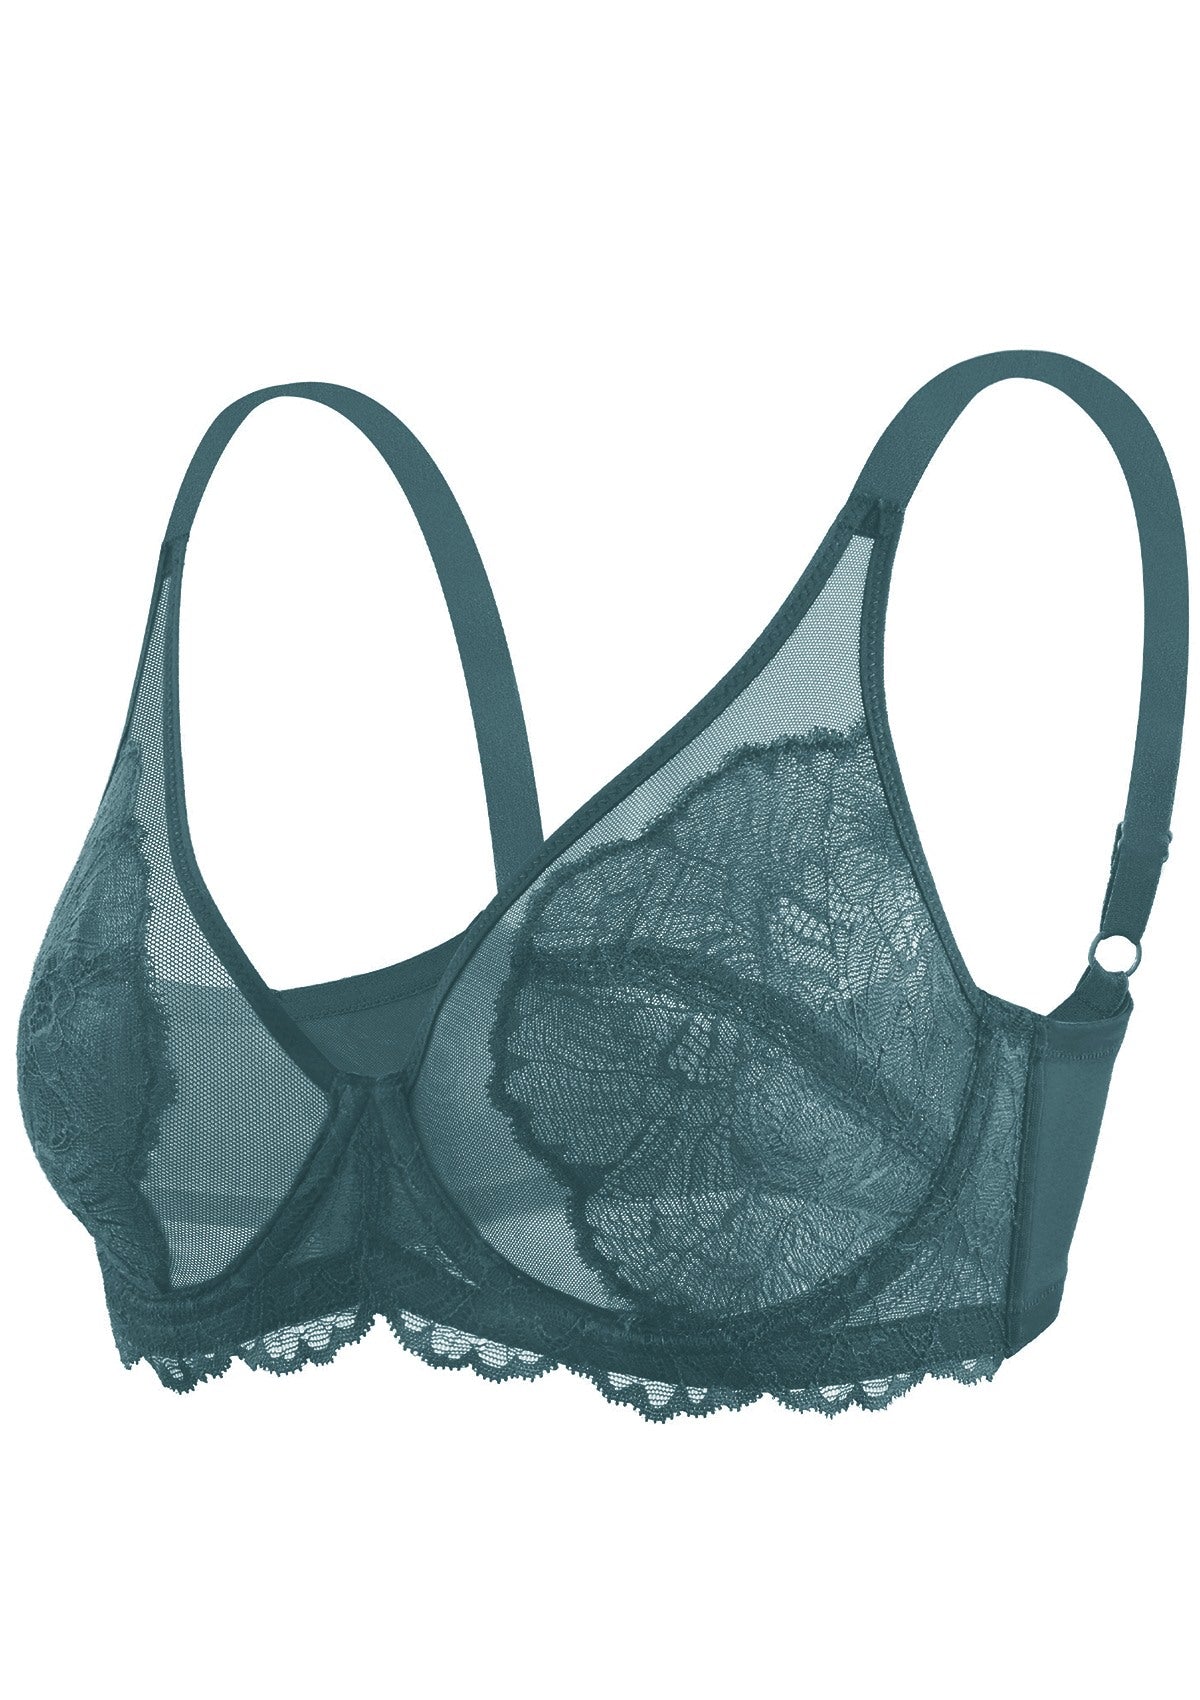 HSIA Blossom Full Figure See-Through Lace Bra For Side And Back Fat - Balsam Blue / 34 / G